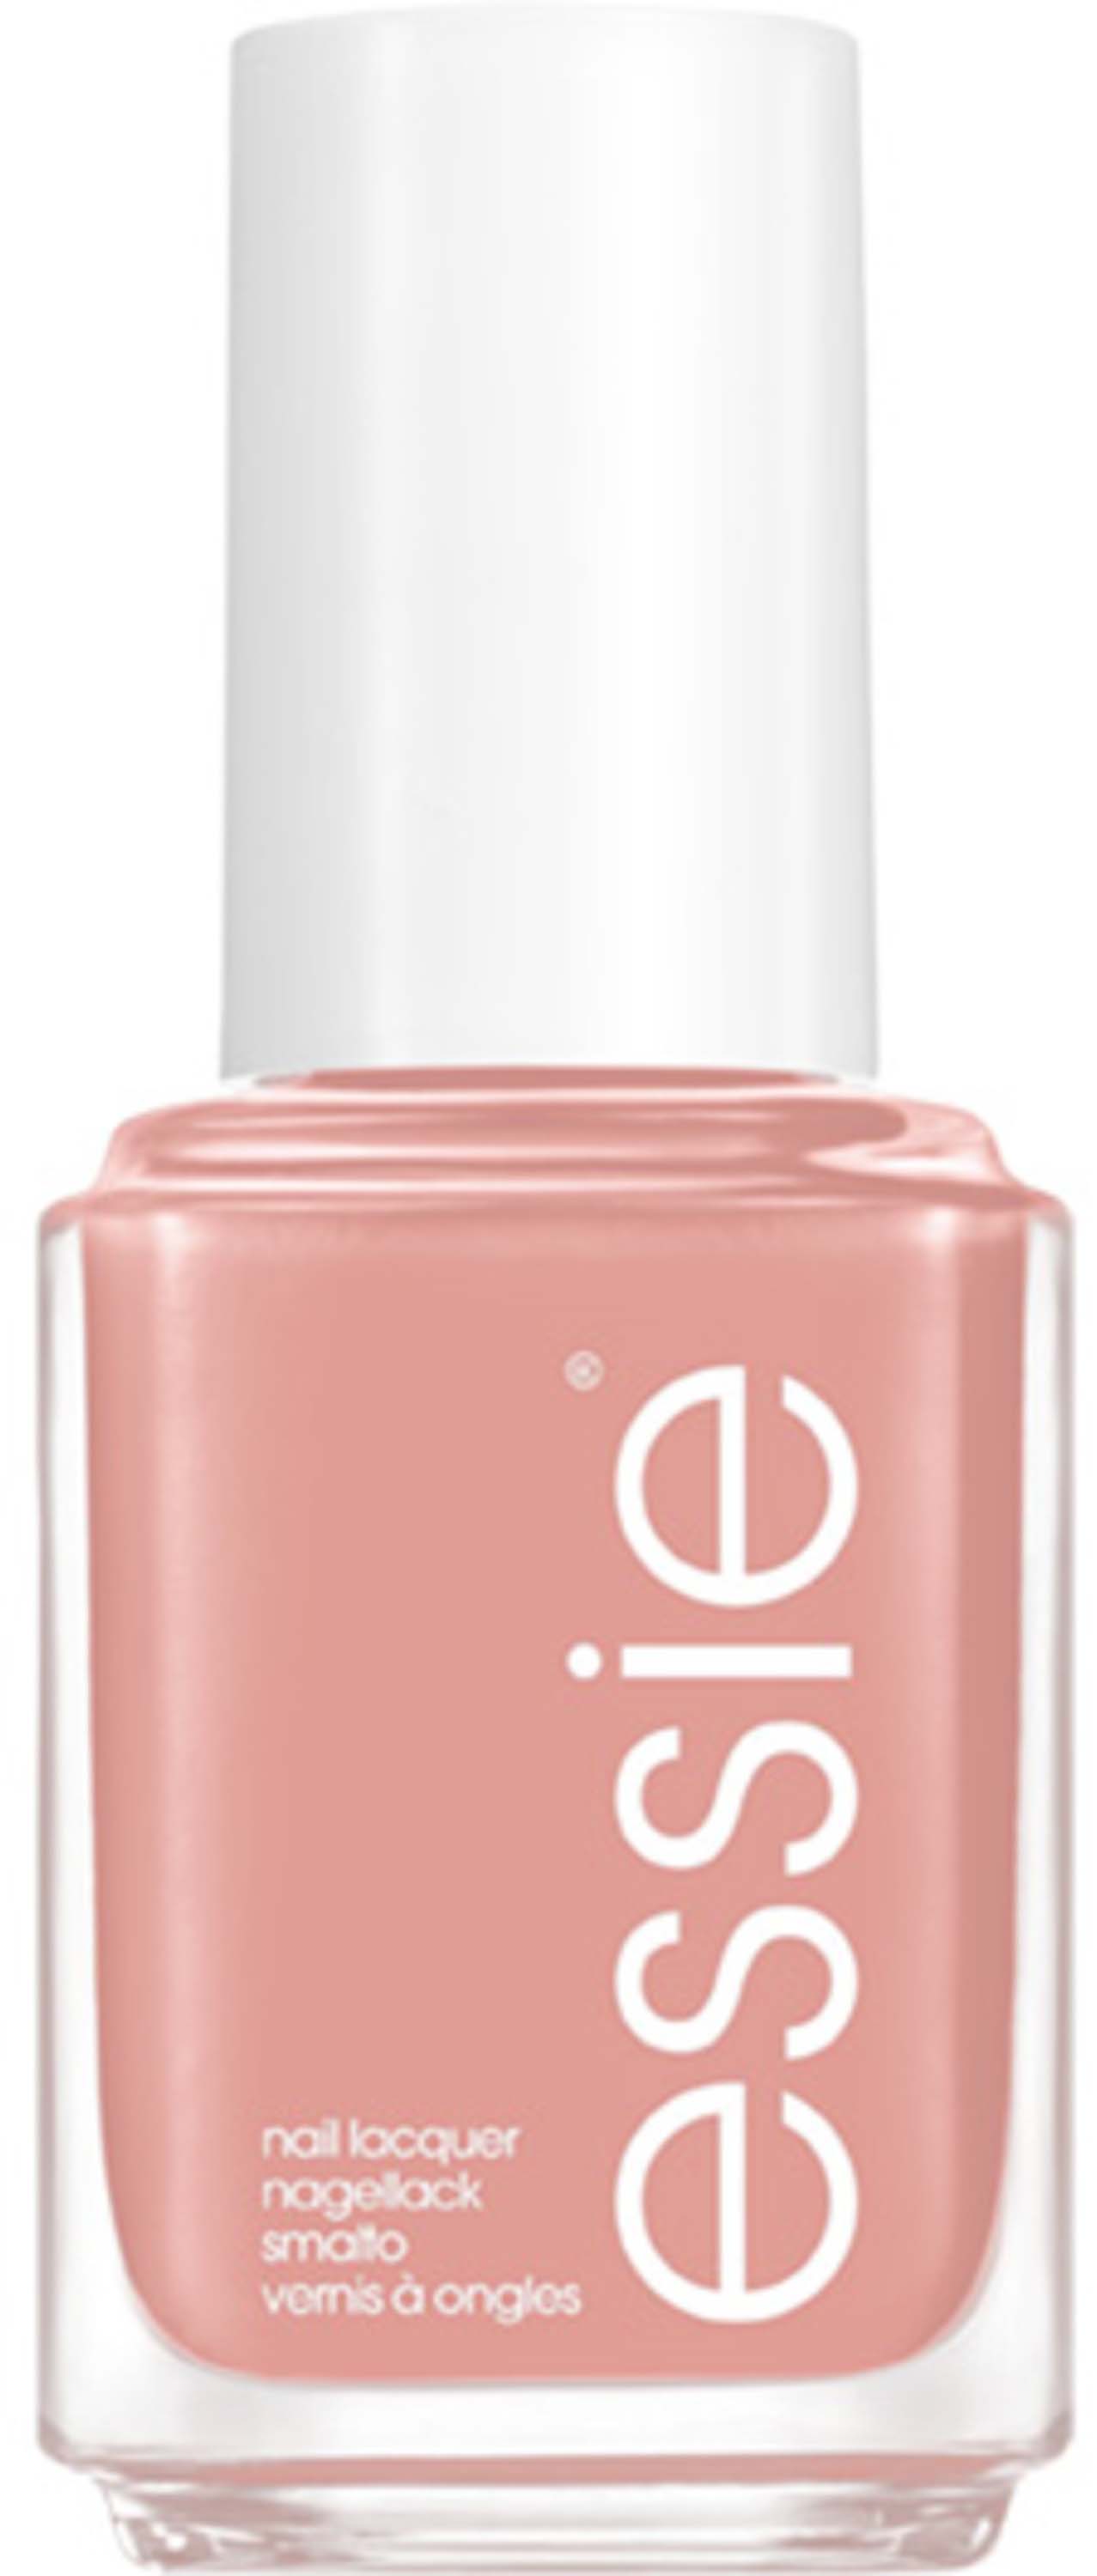 Essie not red-y for bed 749 Is Lacquer collection Real The Snuggle Nail